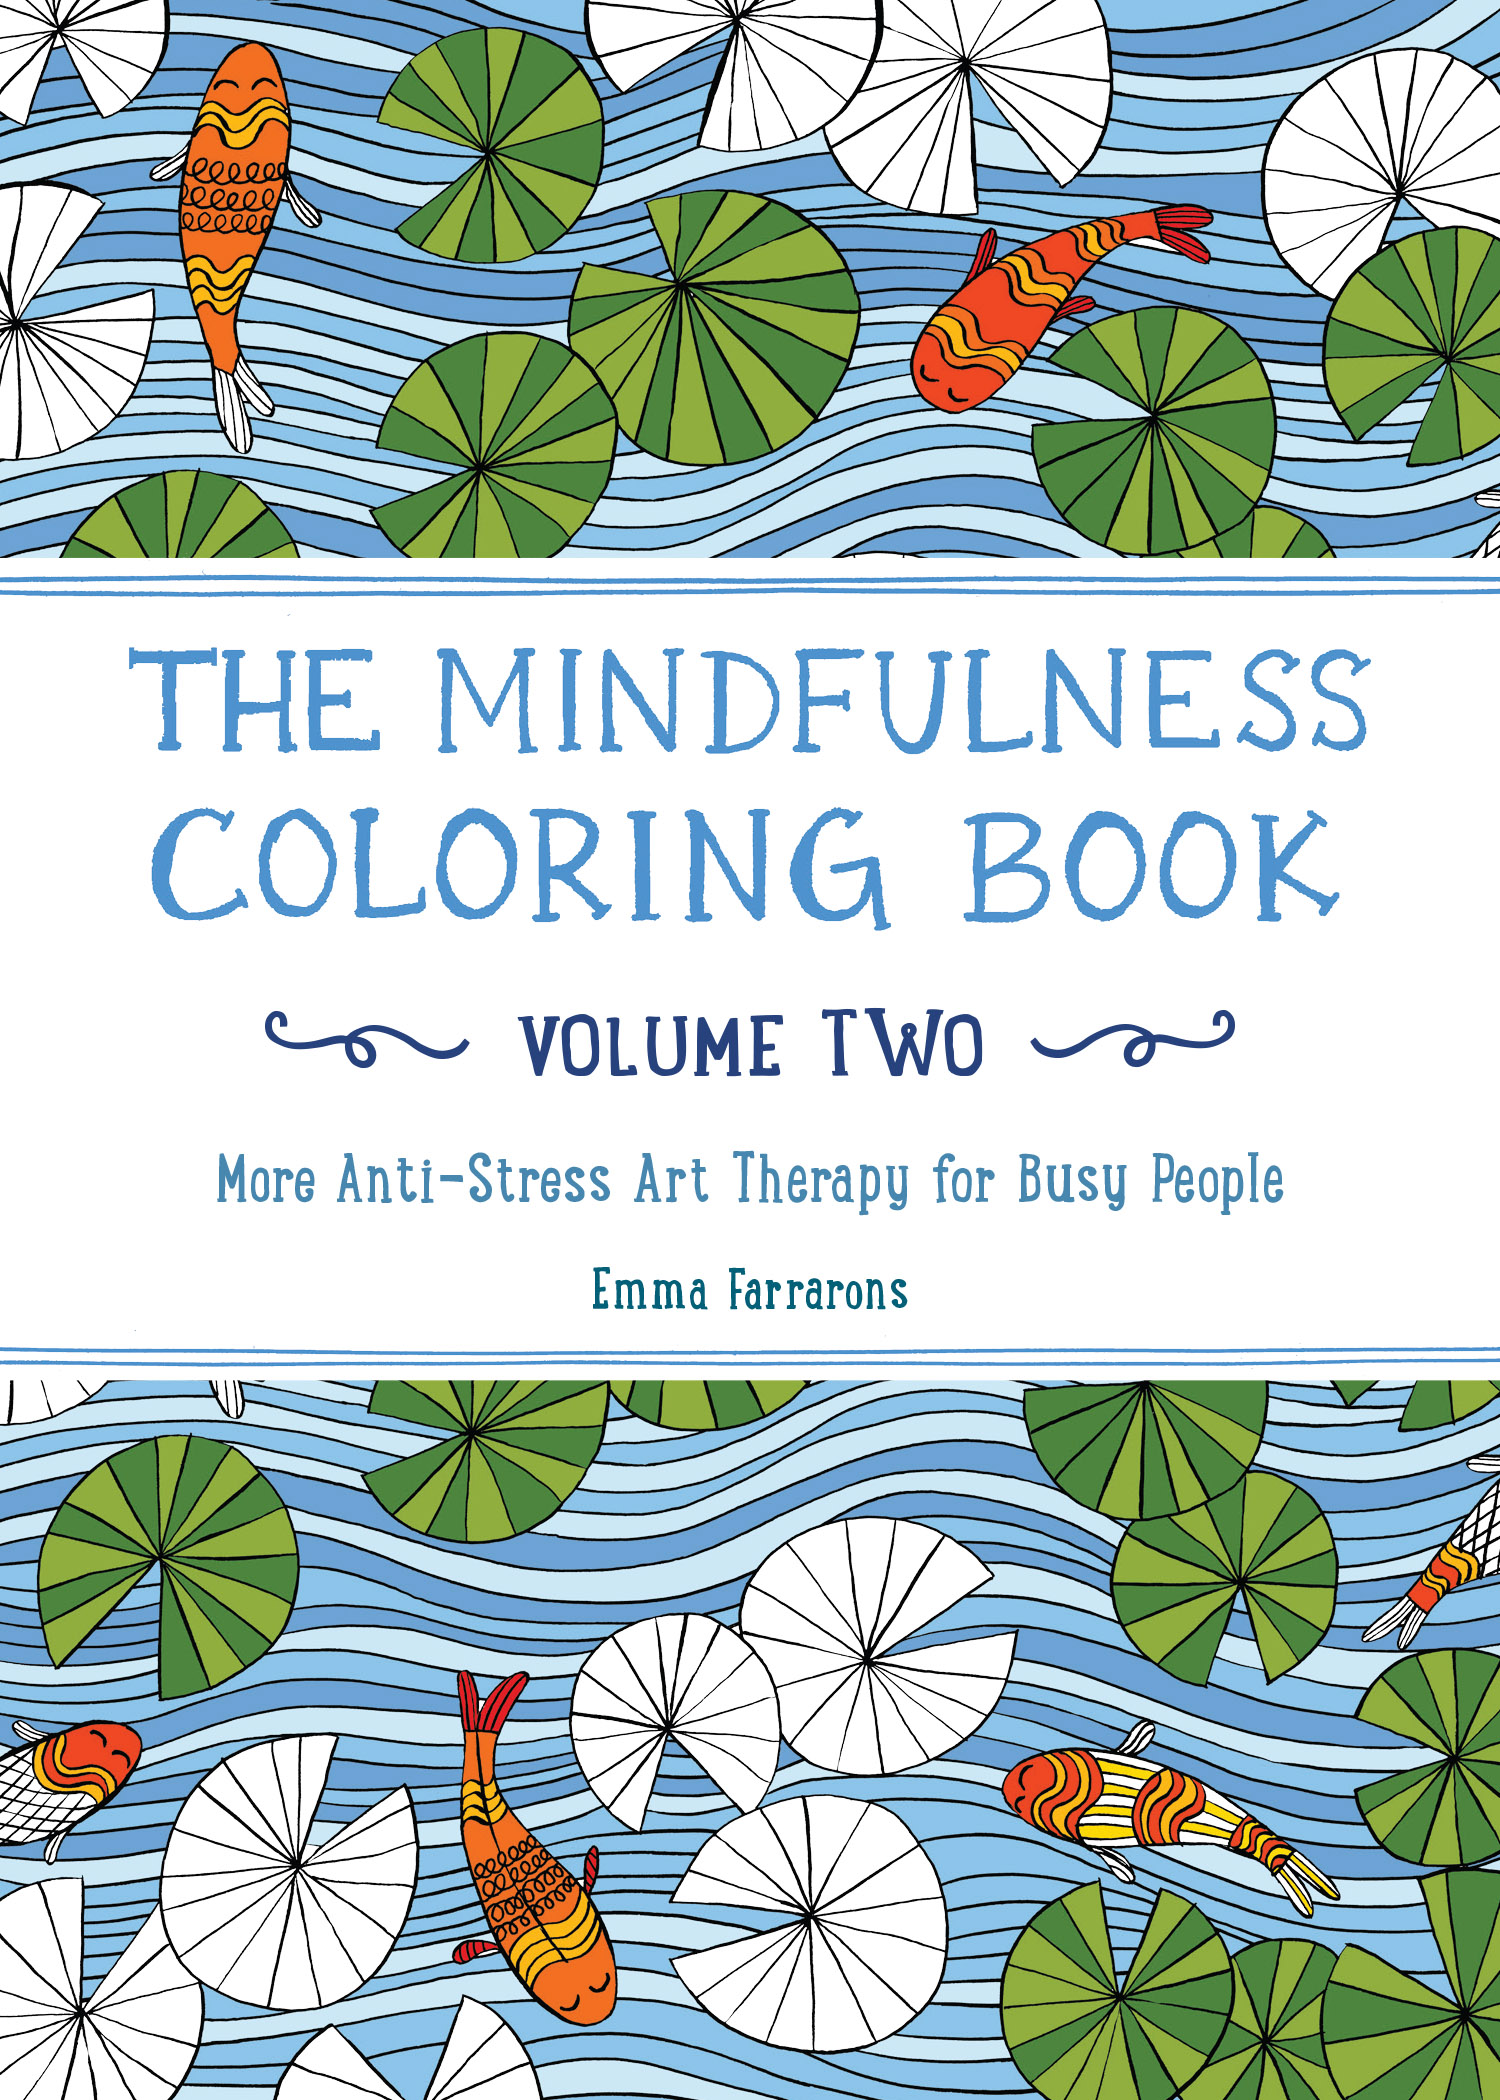 Doodlescapes: Pattern And Design book by Coloring Books